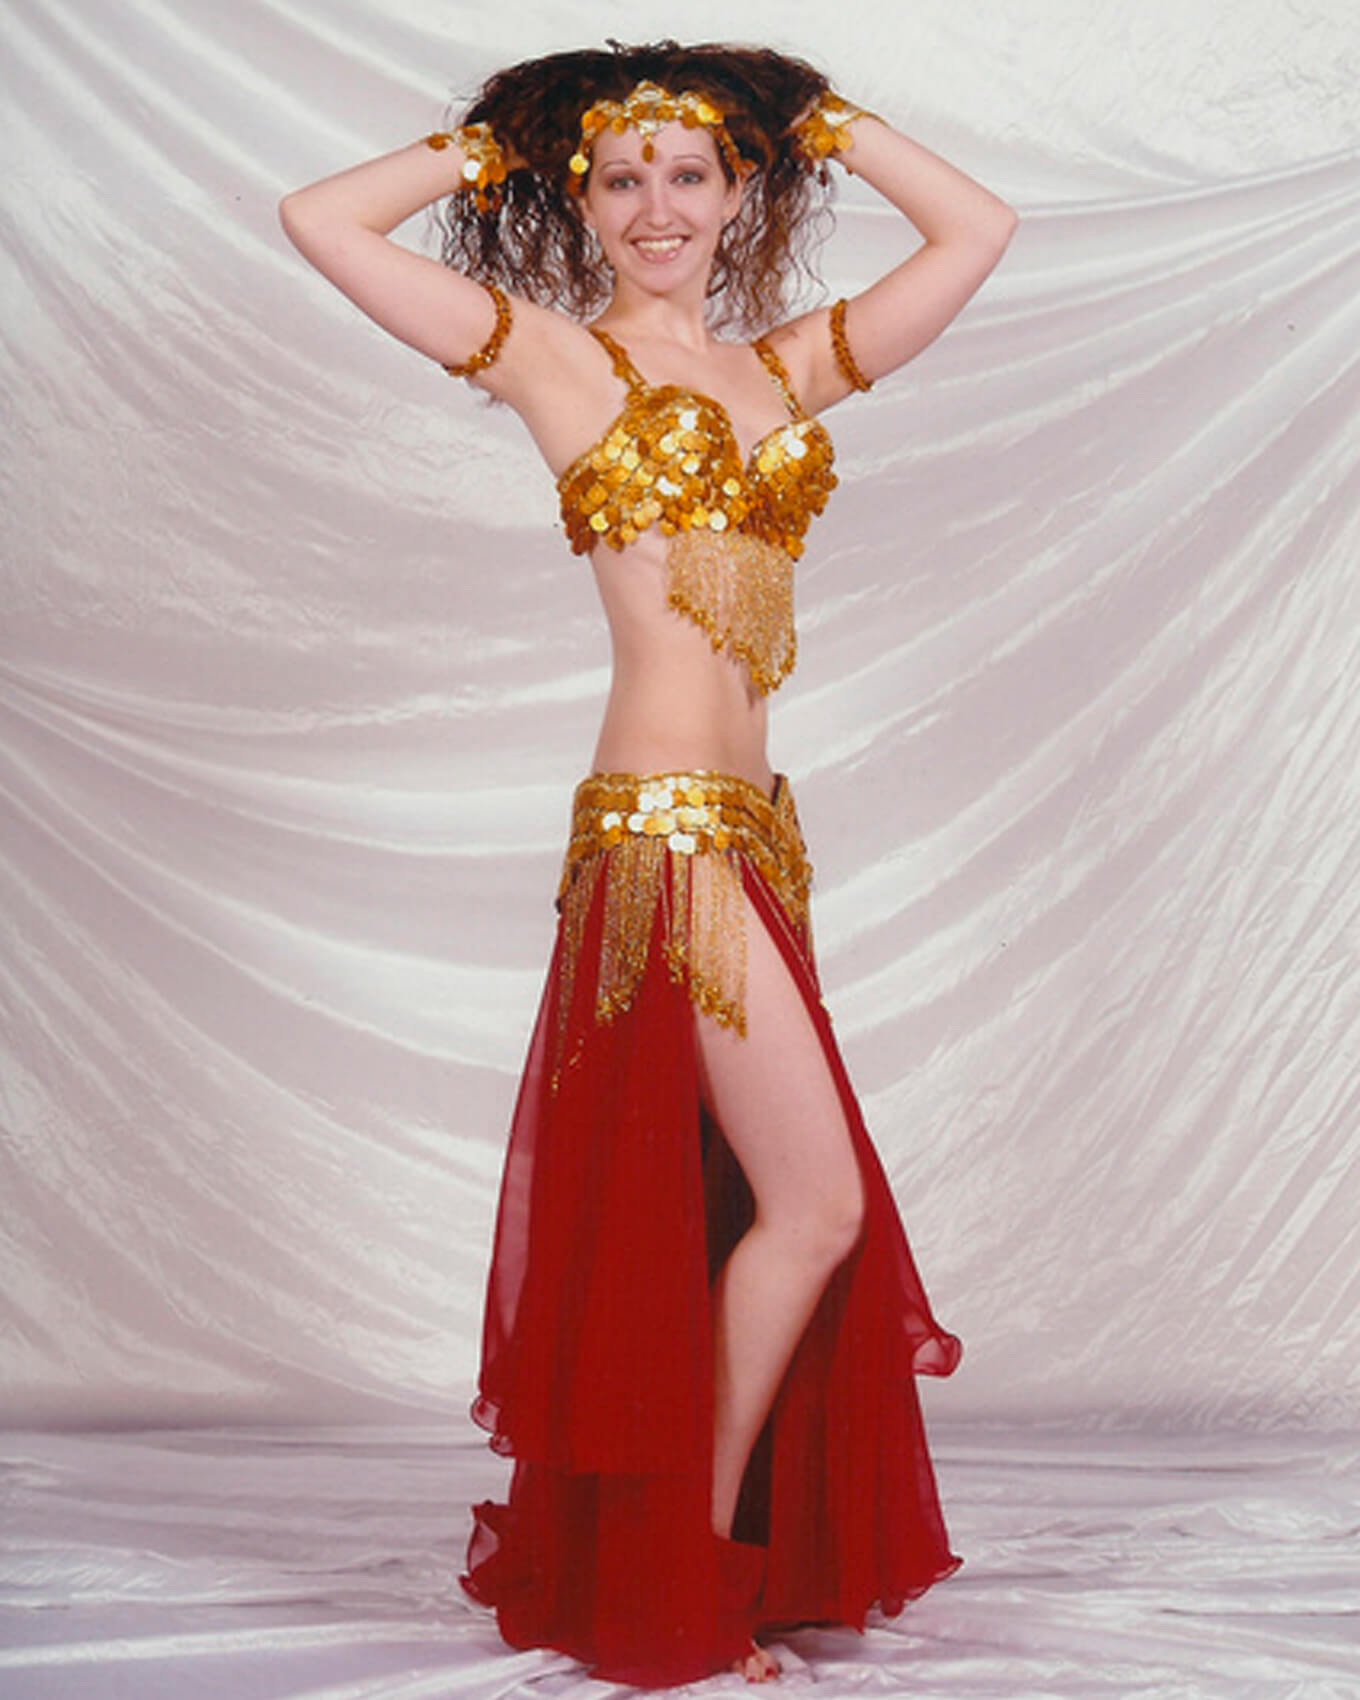 Donna wearing one of her red and gold belly dance outfits